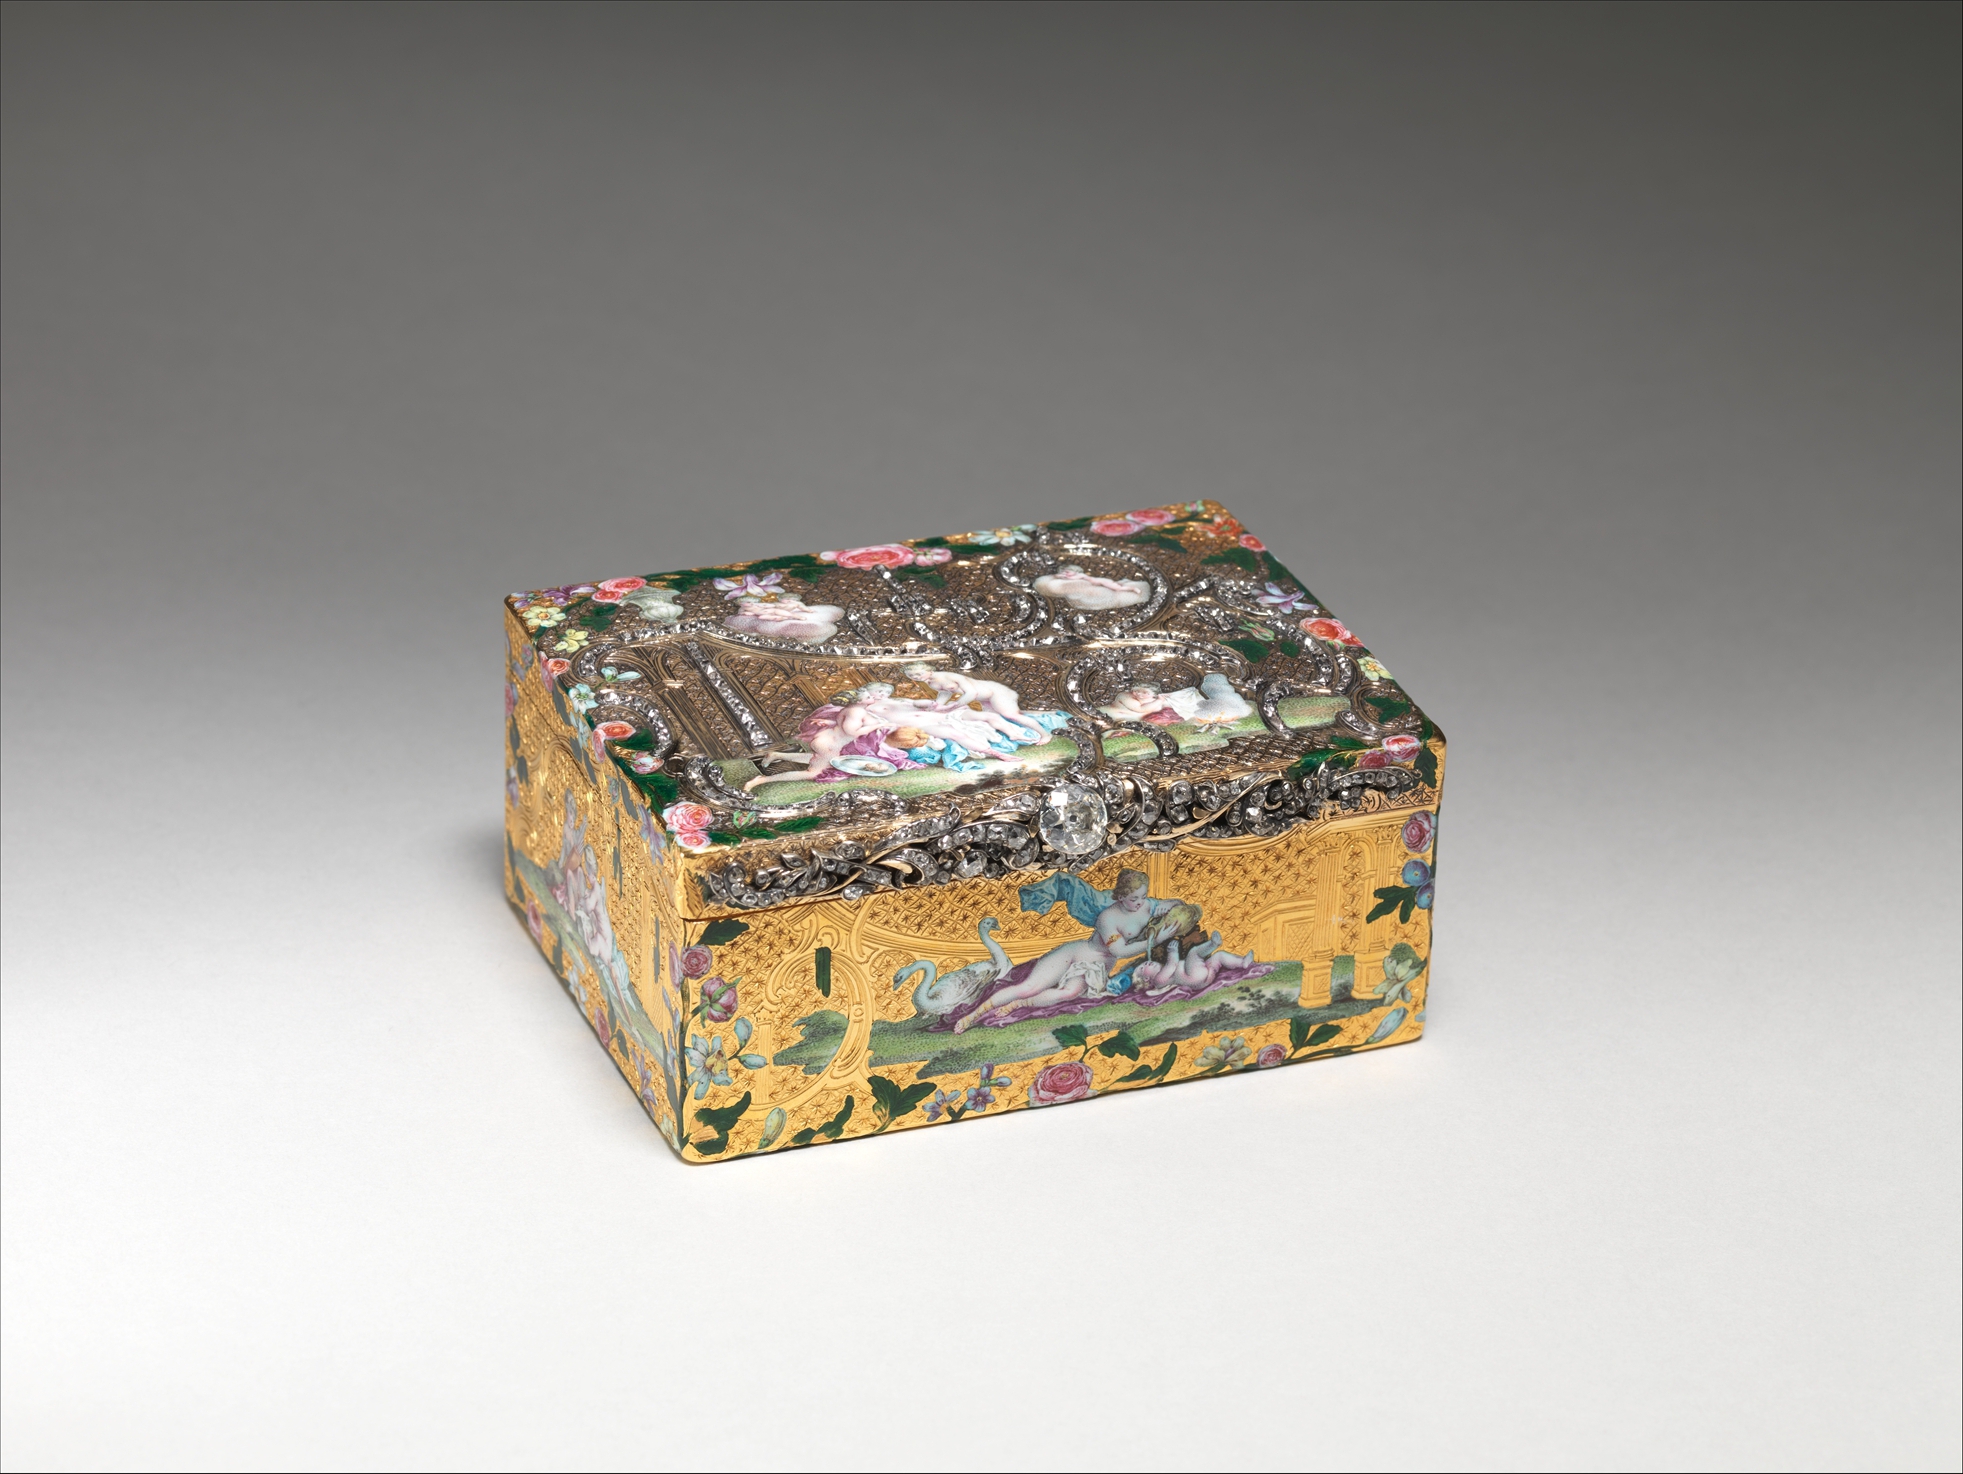 File:Snuff Container, Central Africa, Brücke Museum Berlin, 64986, view  d.jpg - Wikimedia Commons